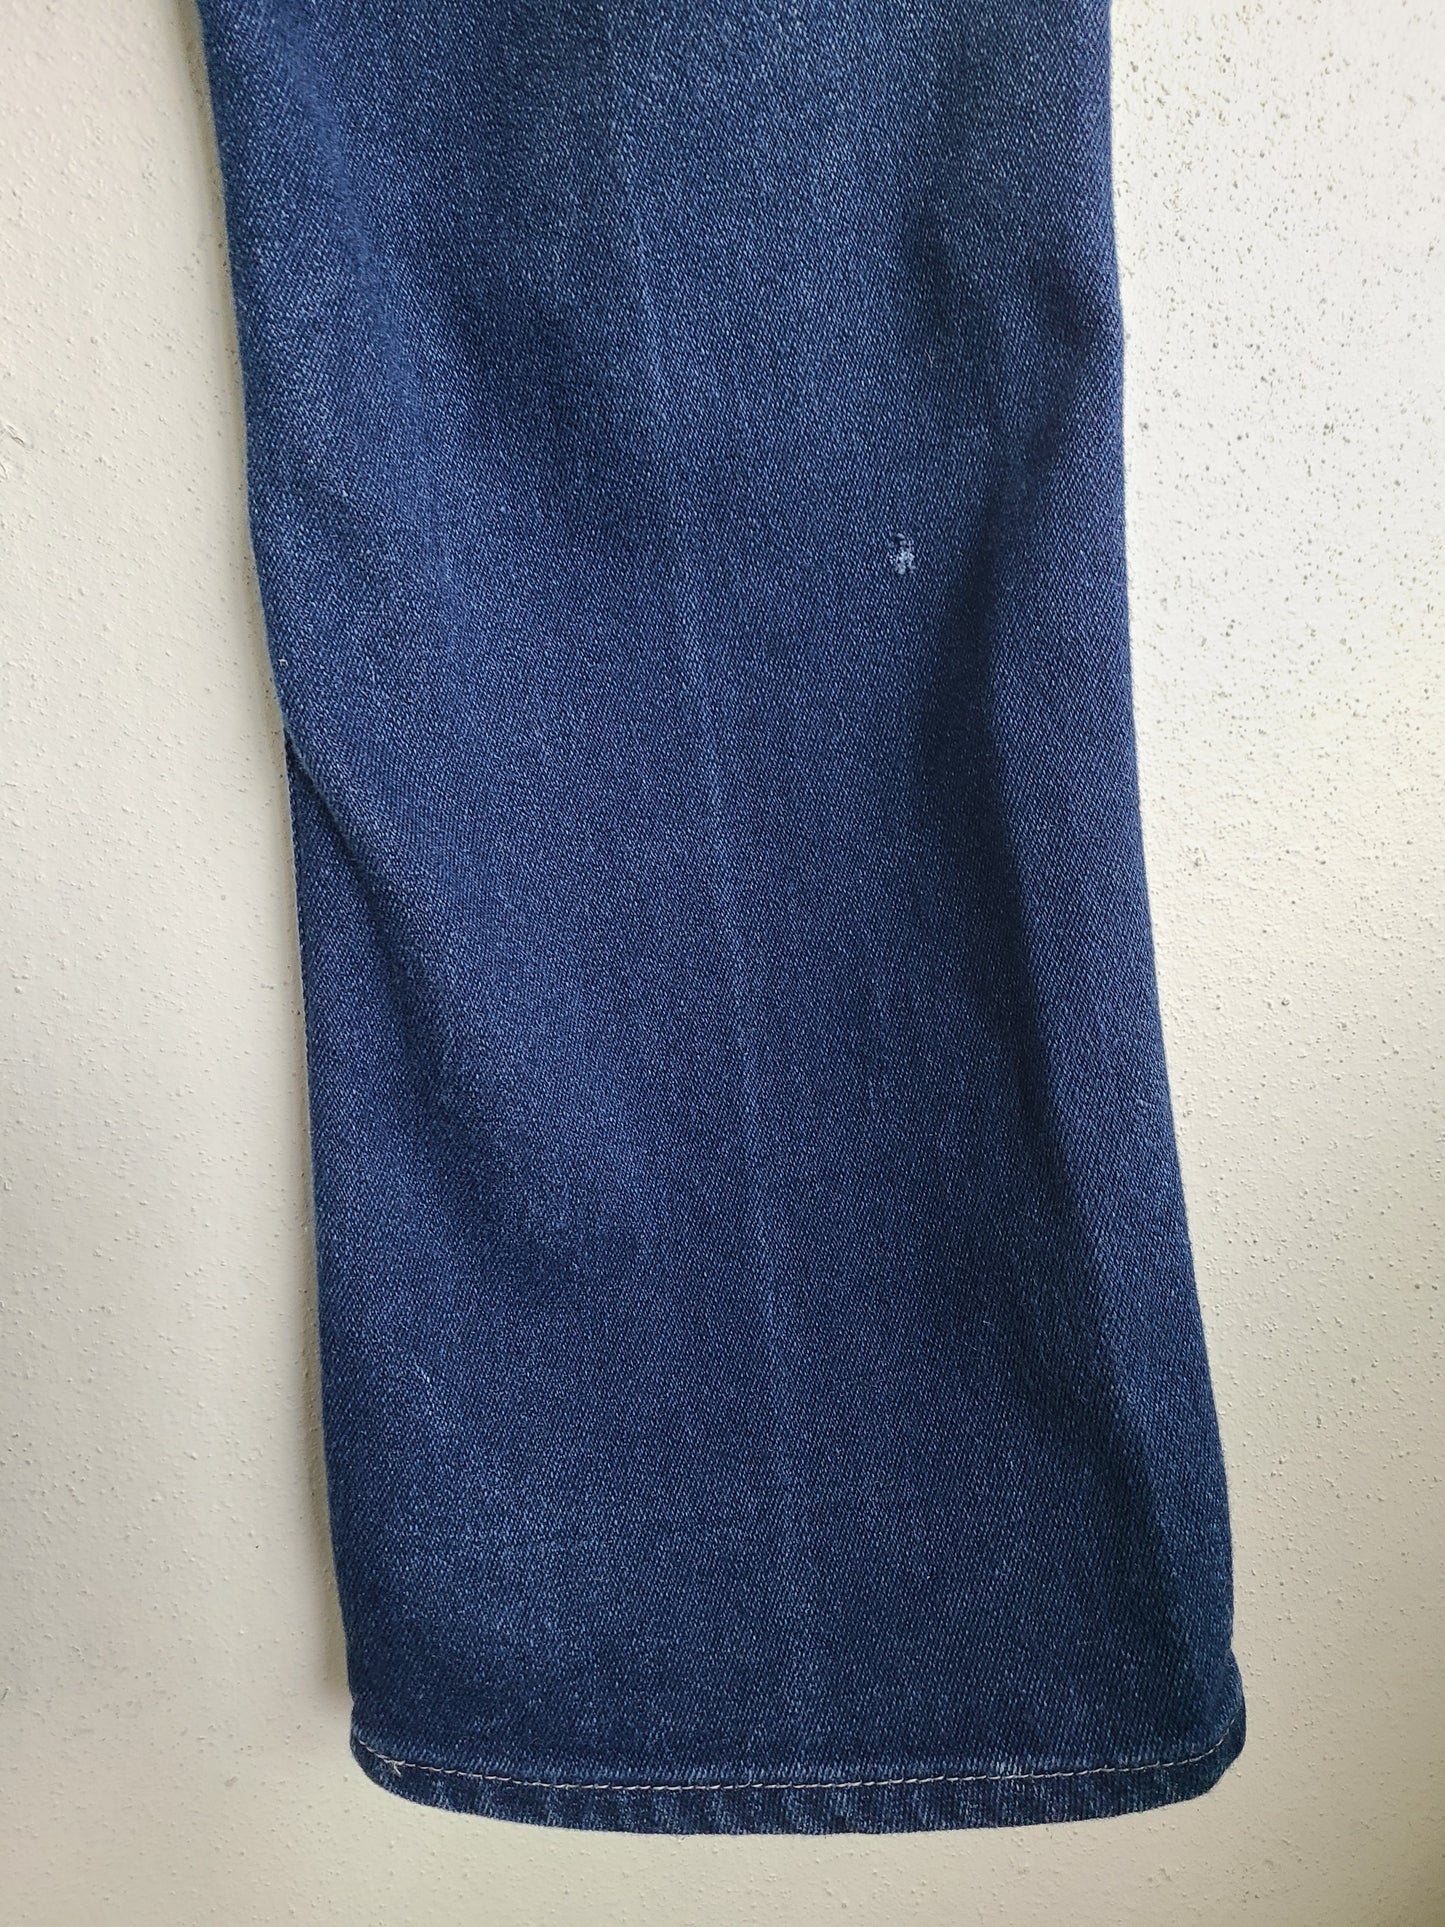 Vintage 1970s GwG Straight Leg Jeans Union Made In Canada 36 x 34